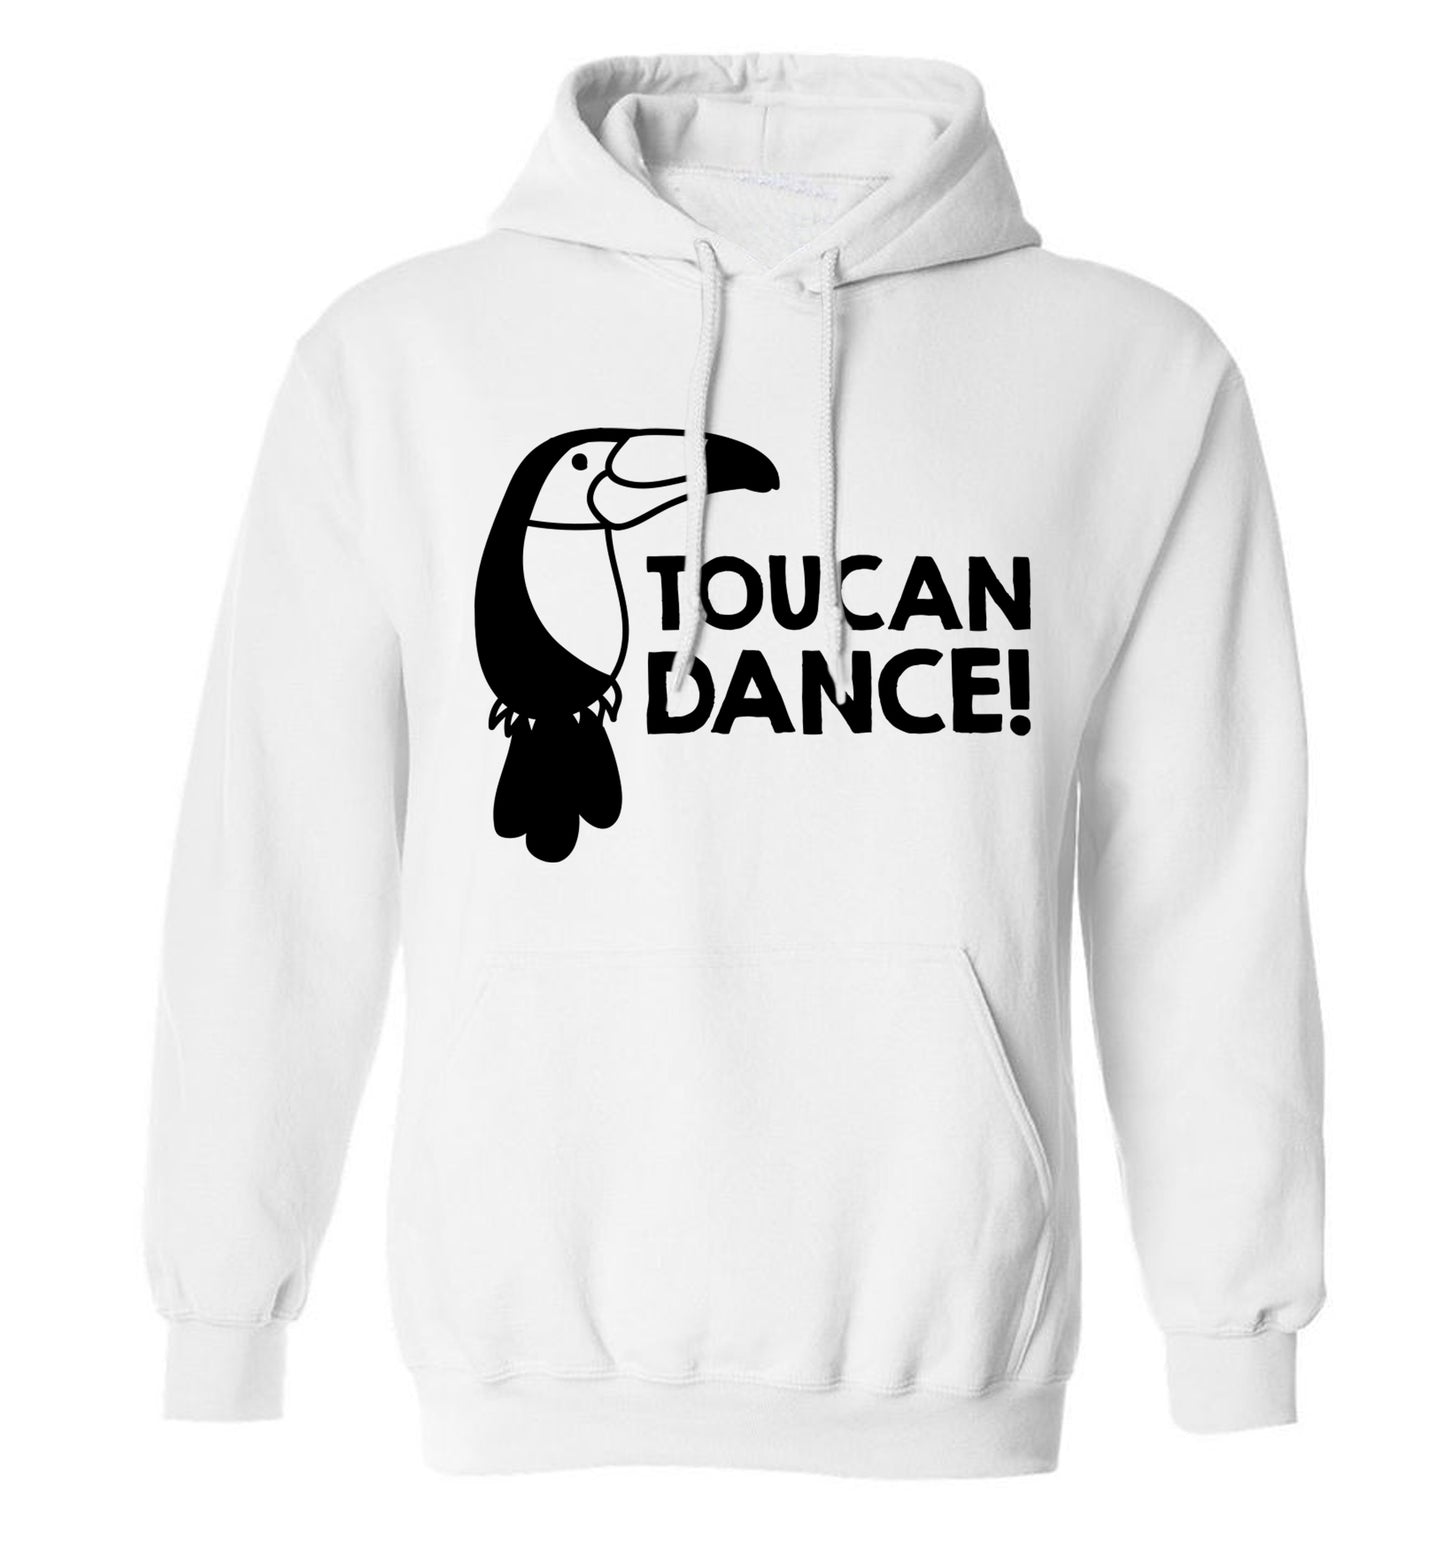 Toucan dance adults unisex white hoodie 2XL